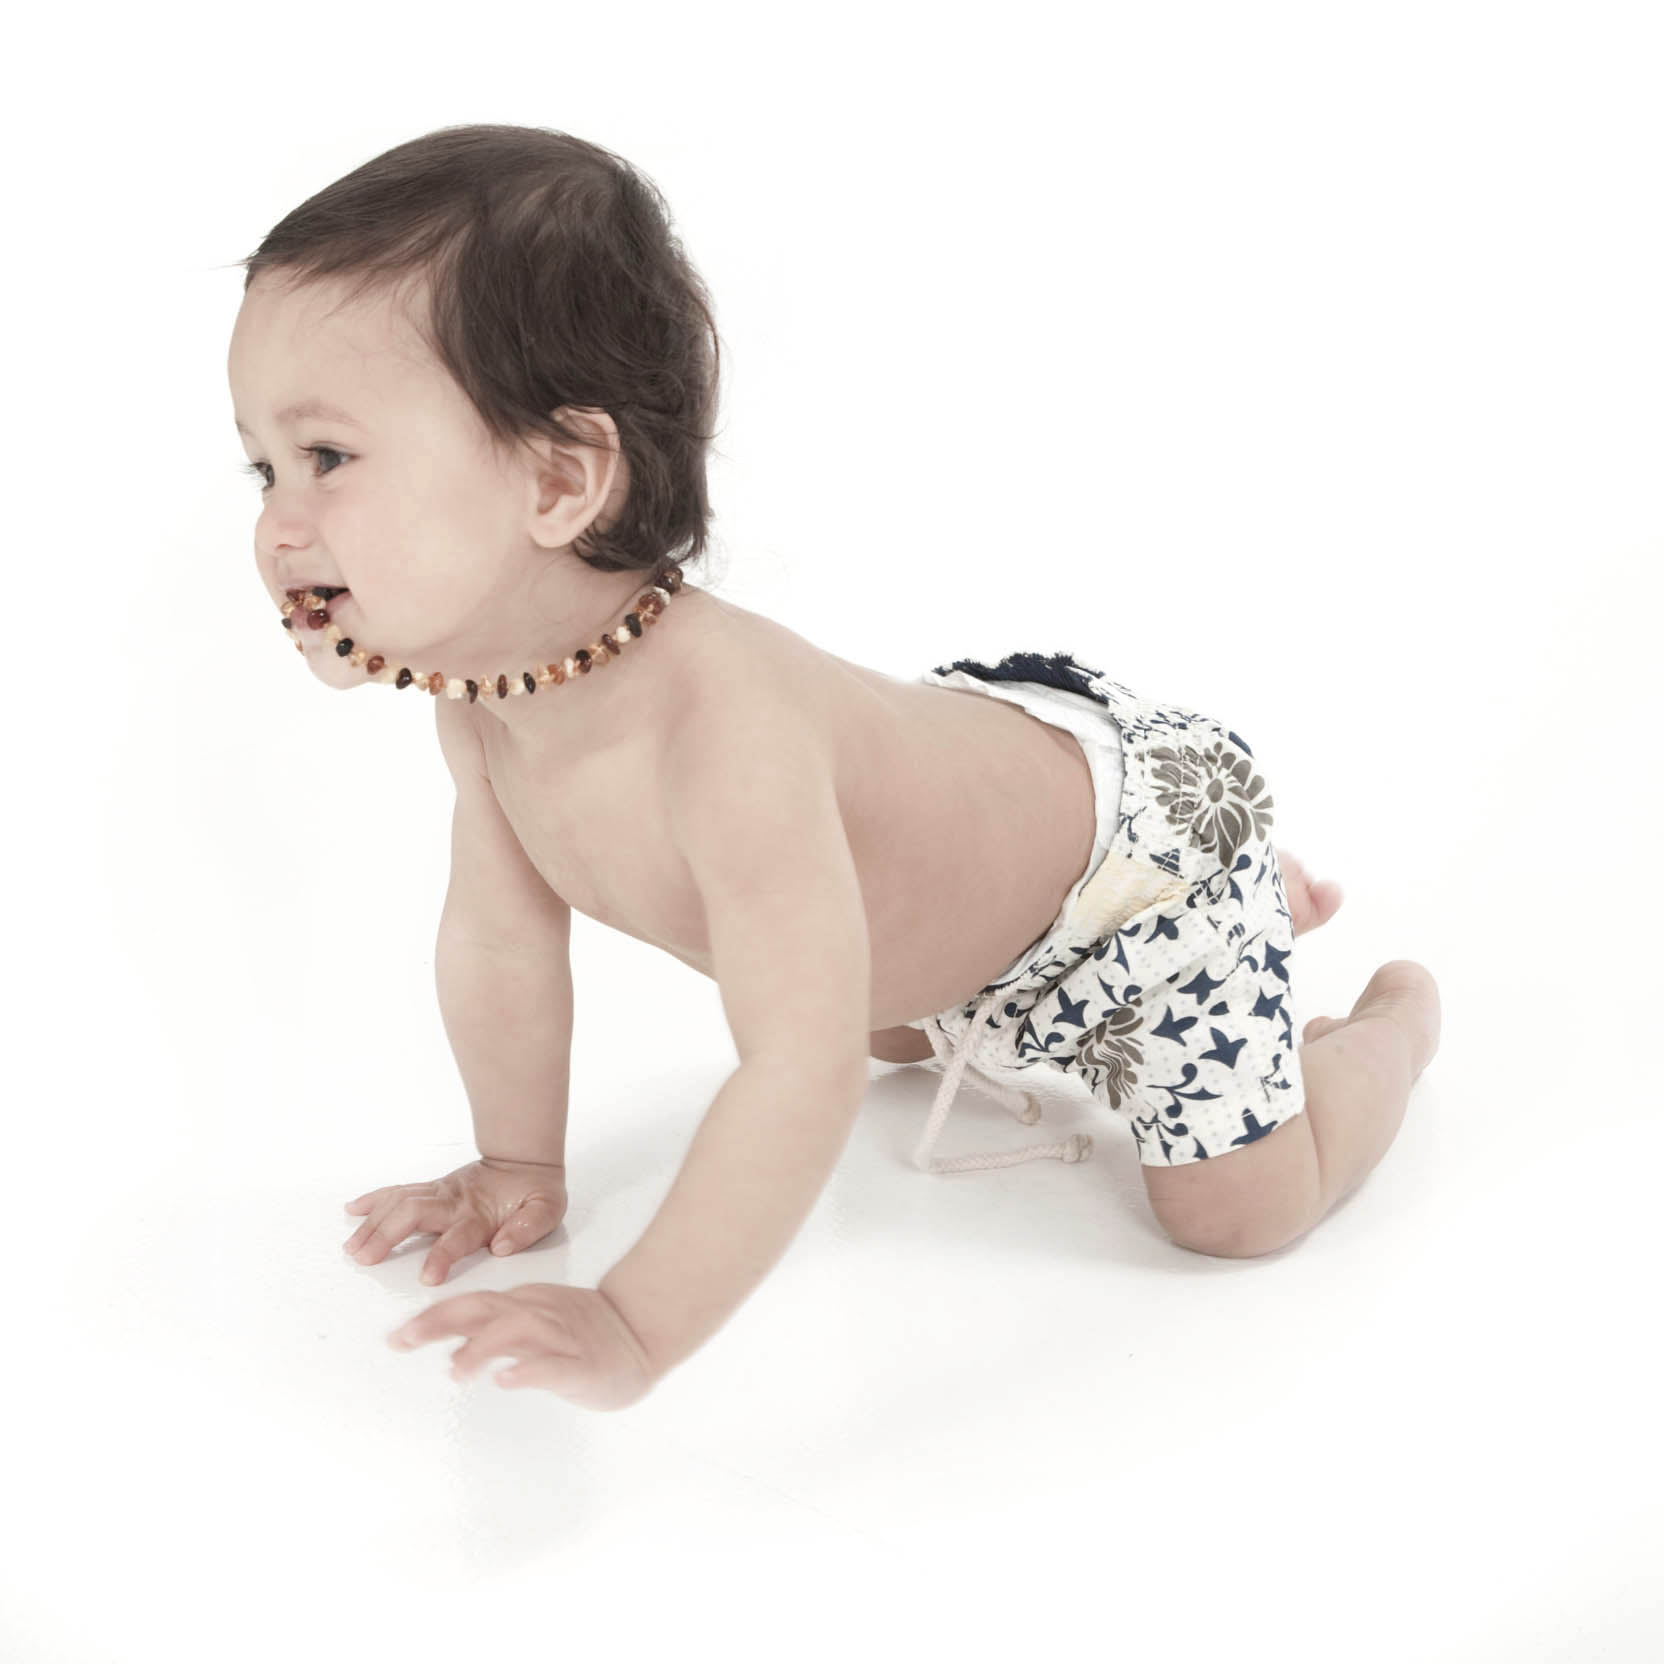 Toddler little boy crawling and chewing his necklace professional studio photography by Anais Chaine in Auckland Ponsonby New Zealand